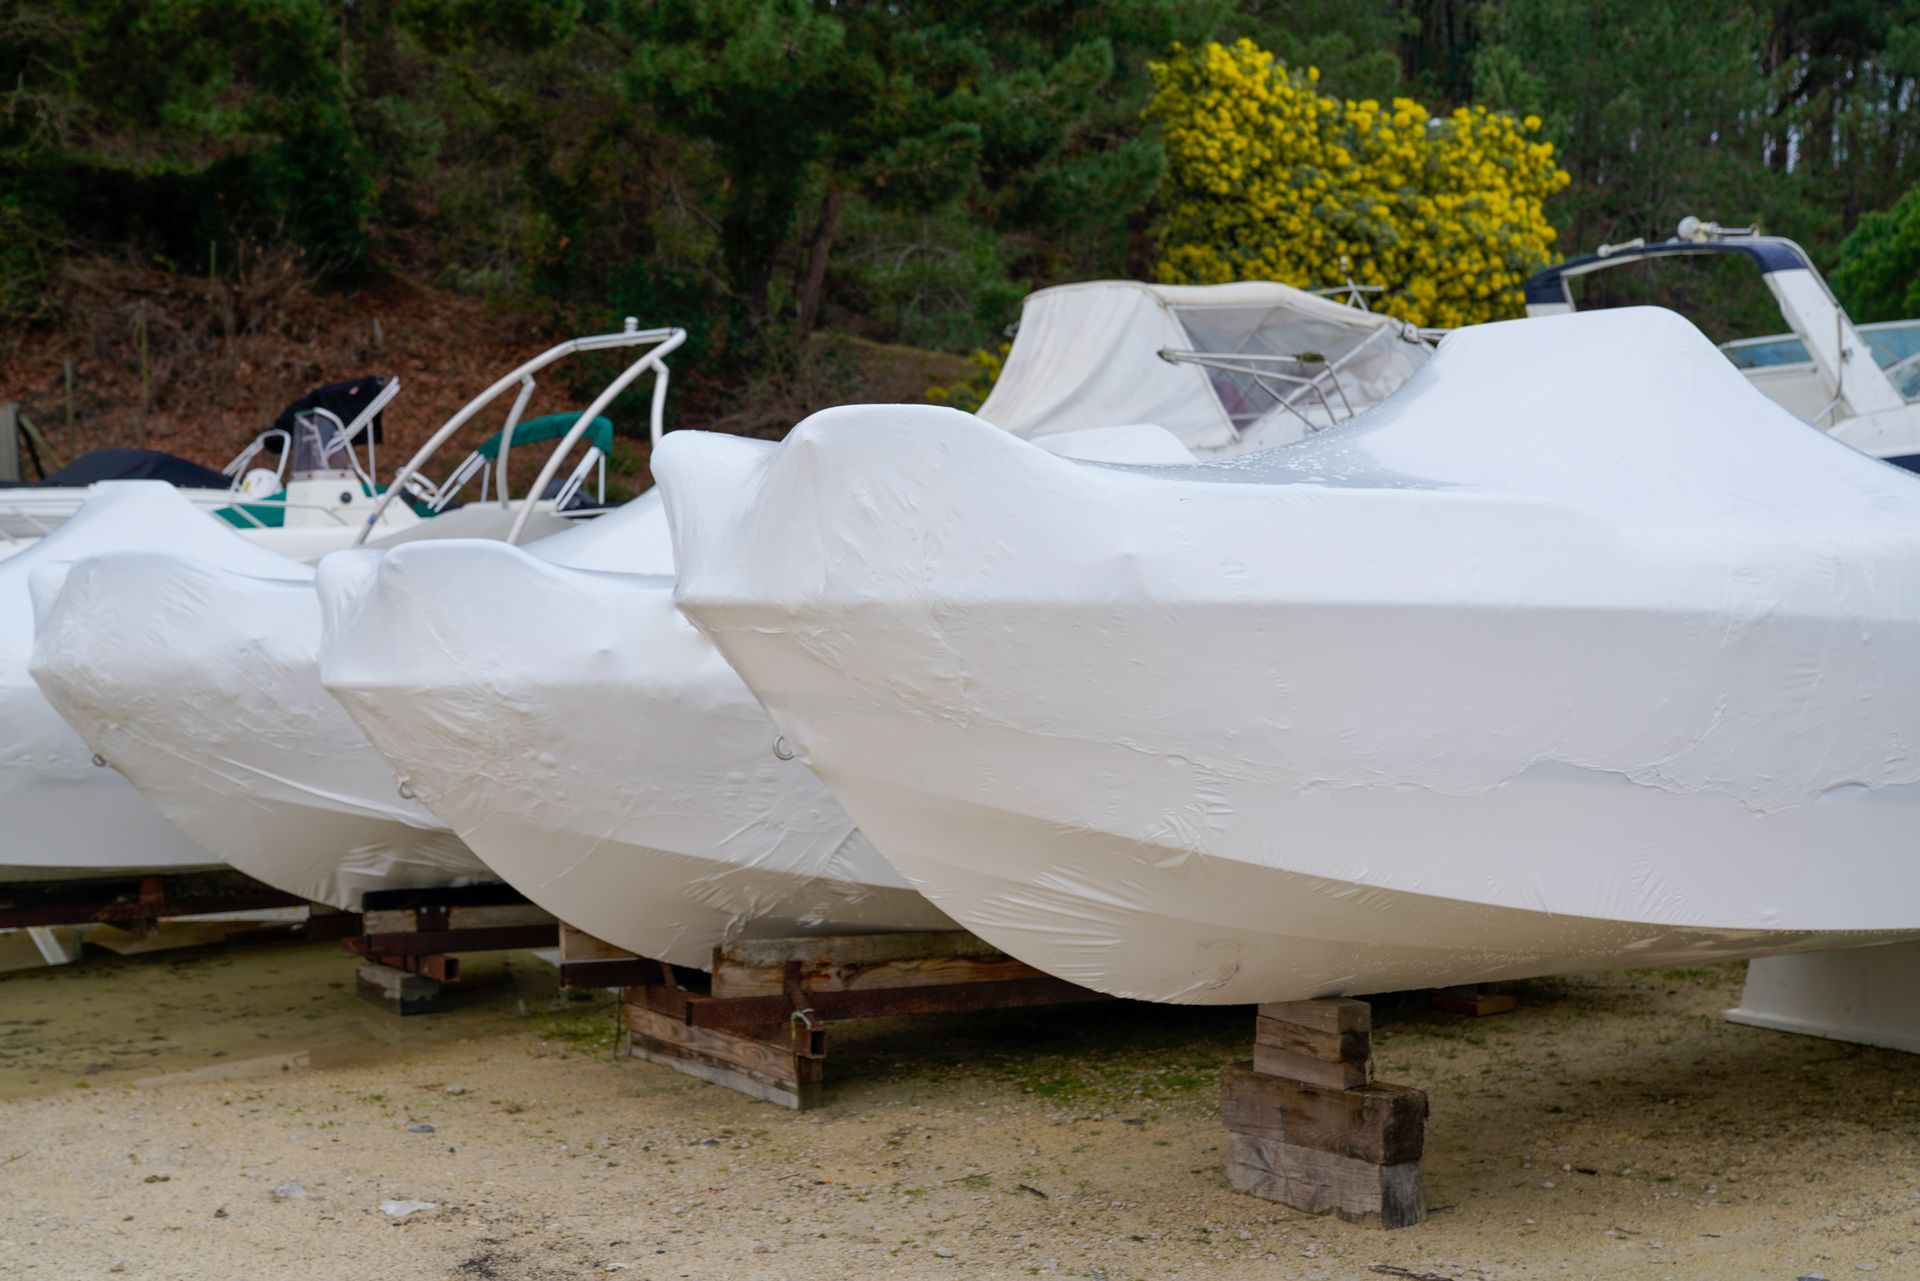 Four small boats stored on land fully covered with white boat covers